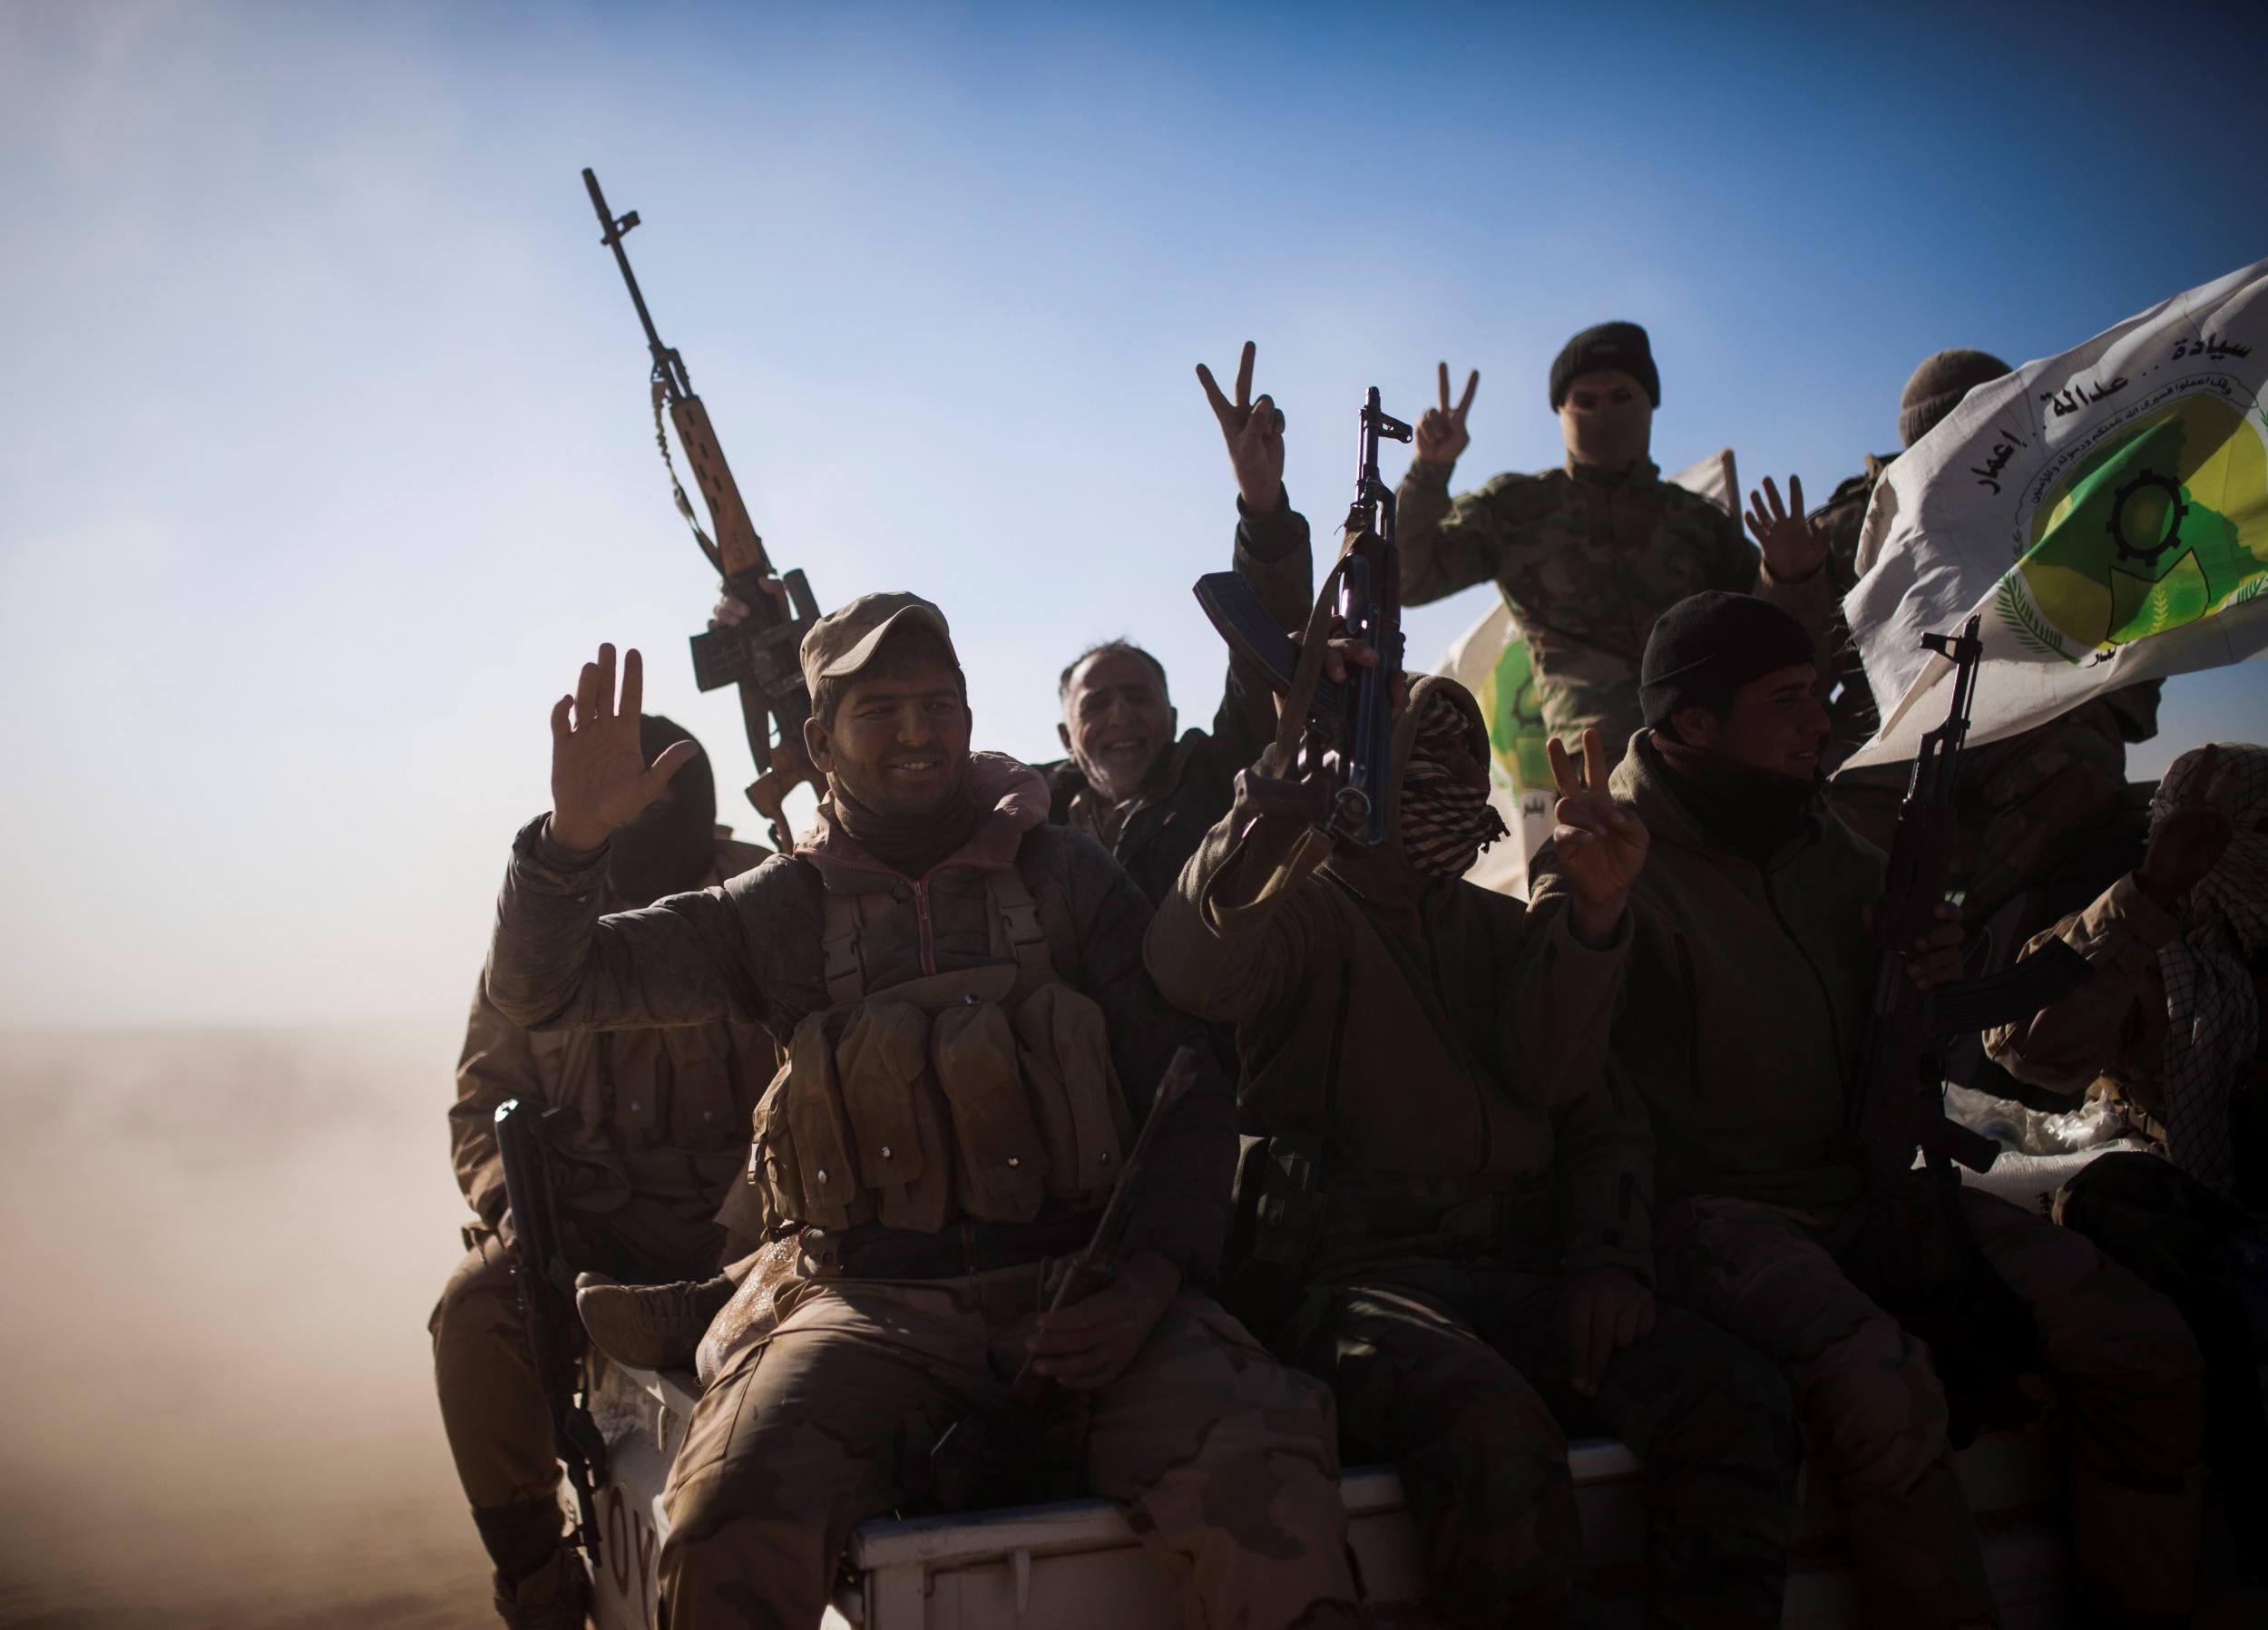 Soldiers of the Hashd al Shaabi (Popular Mobilisation Units) wave the victory sign onboard a pickup truck